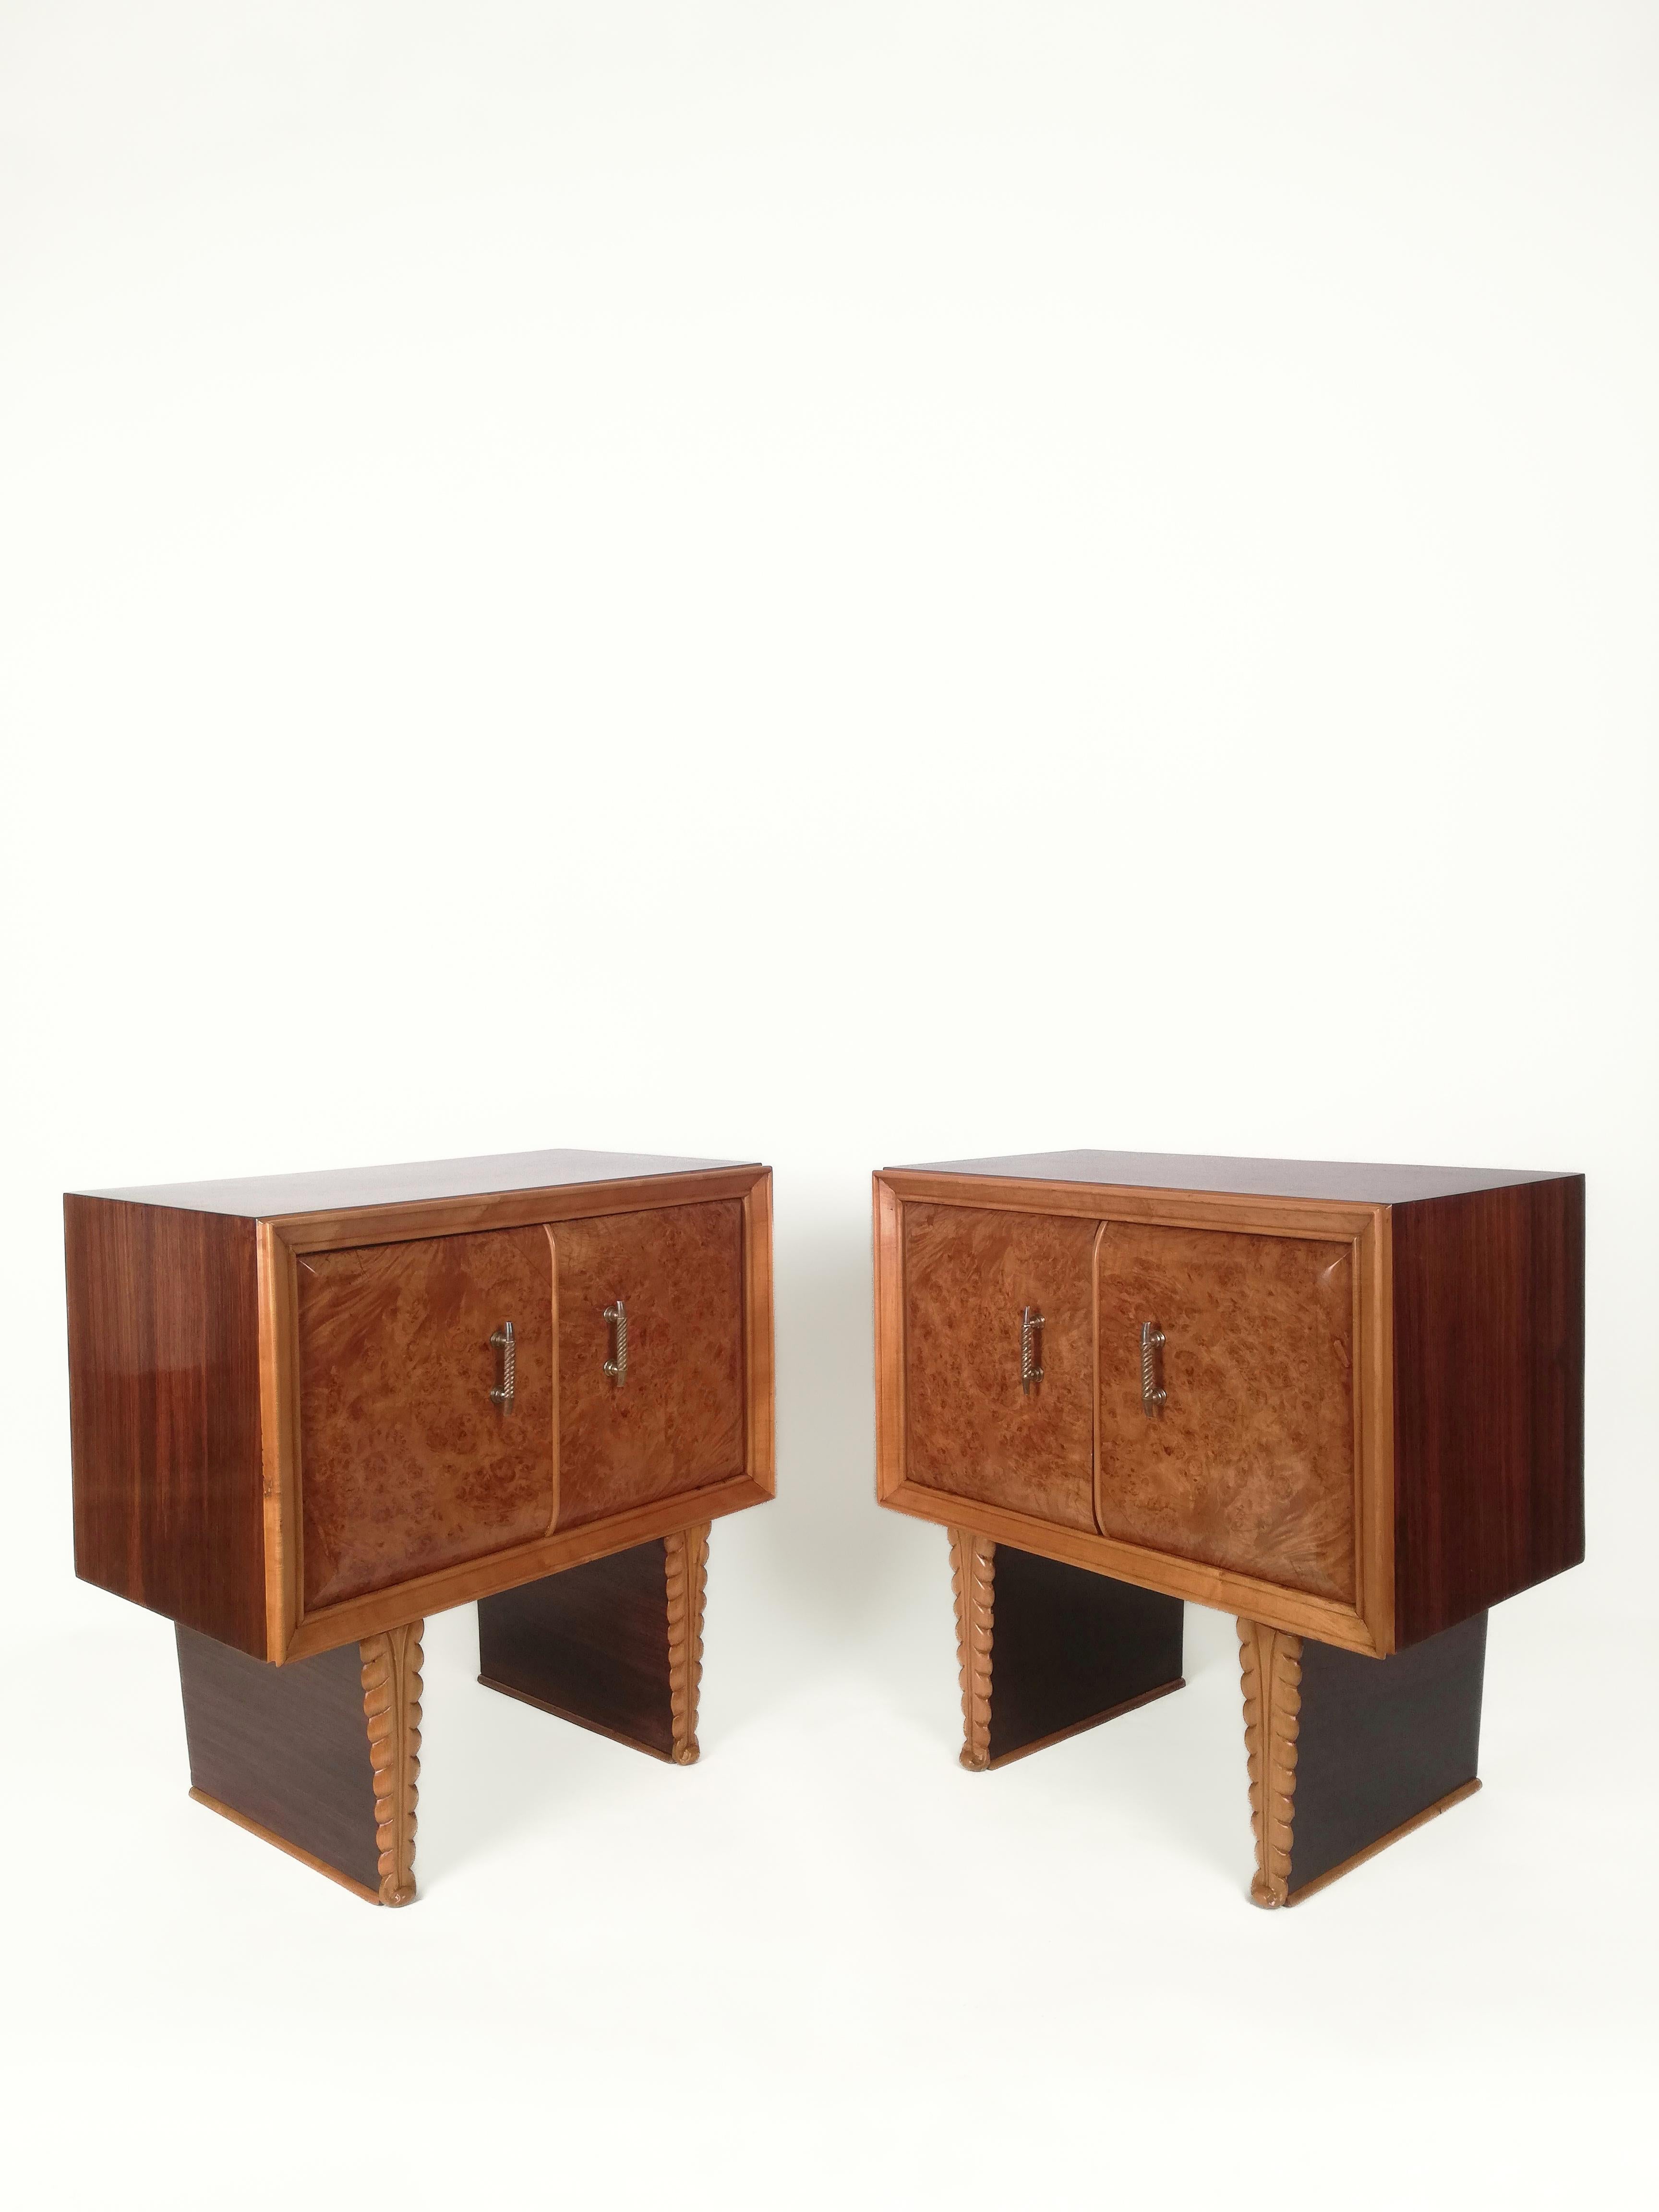 A Pair of very Elegant Mid-Century Modern nightstands in the style of Paolo Buffa datable around the 1950s
These bedside table were made in Italy with fine materials like Burled Walnut, Mahogany veneer and solid maple and the different types of